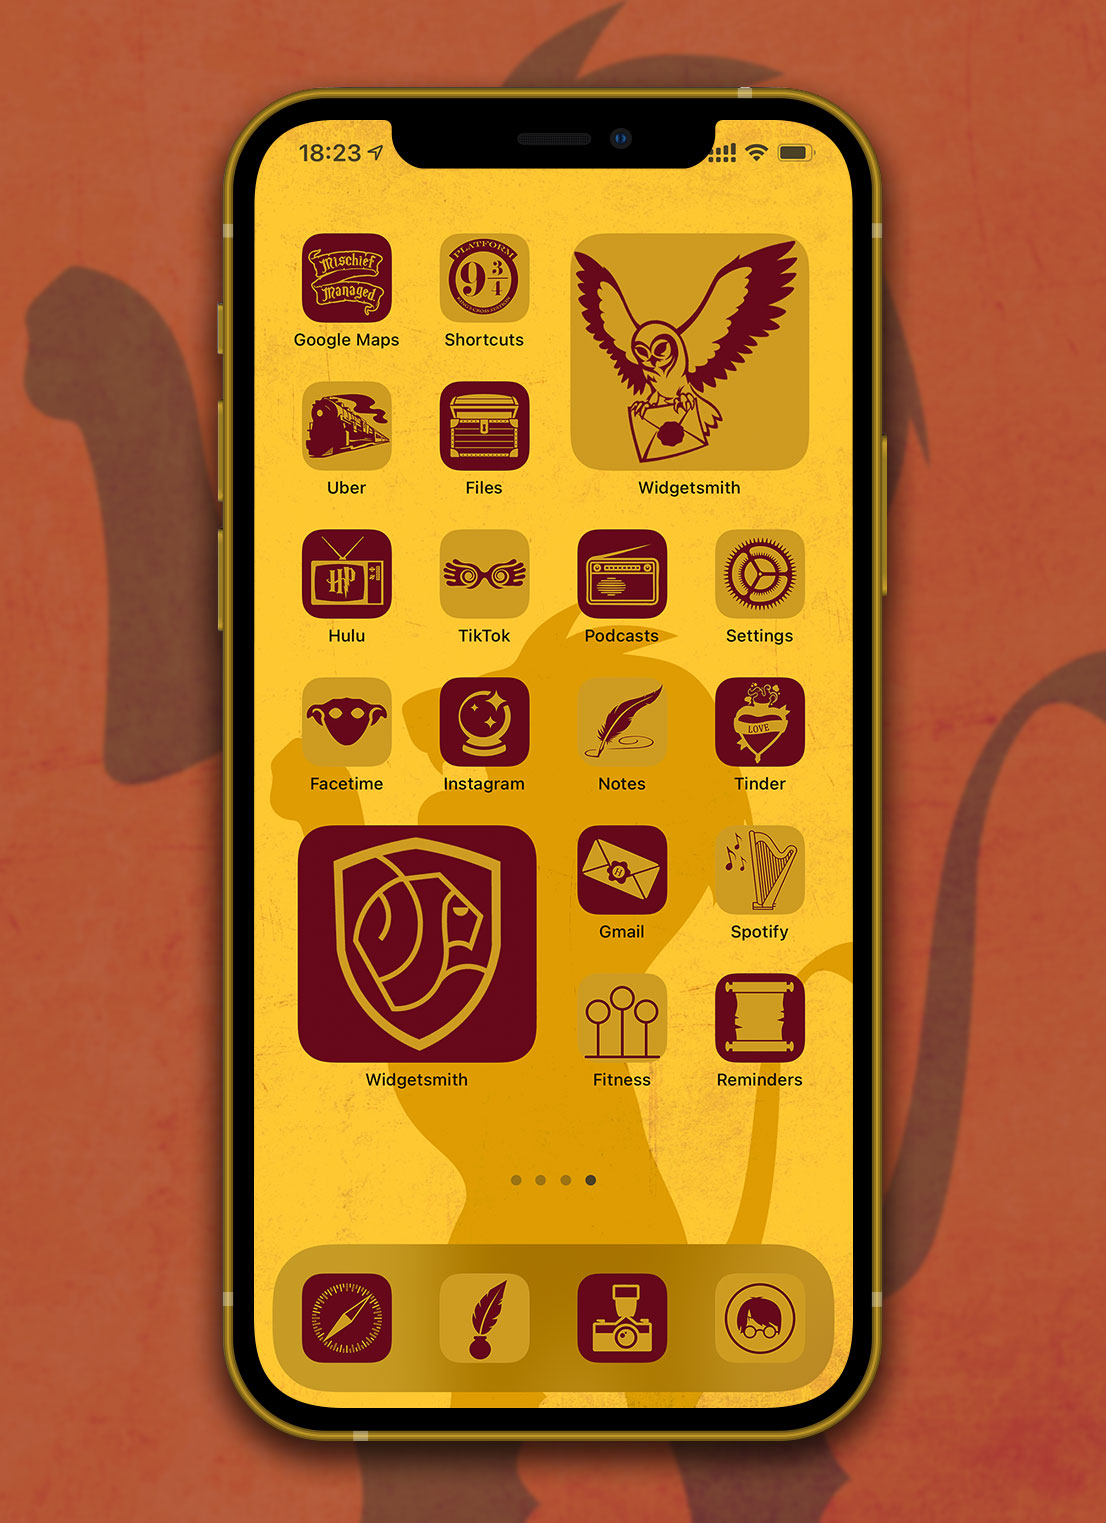 Gryffindor Iphone Wallpapers